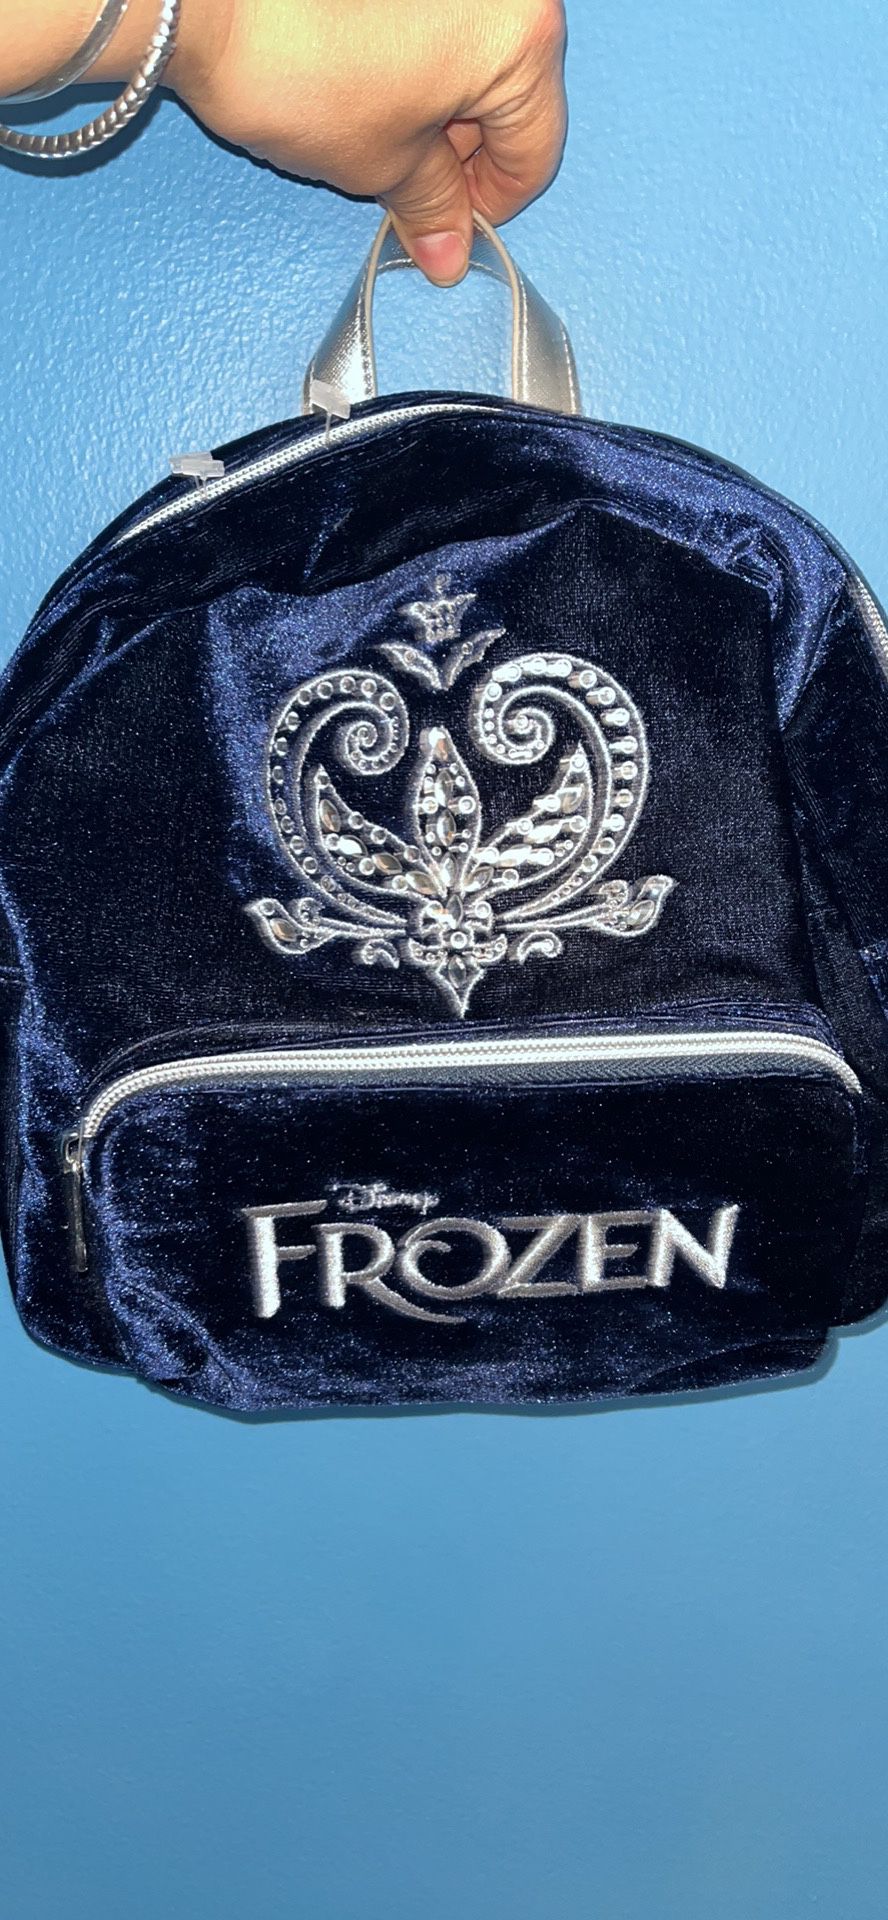 FROZEN THE MUSICAL MINI BACKPACK 